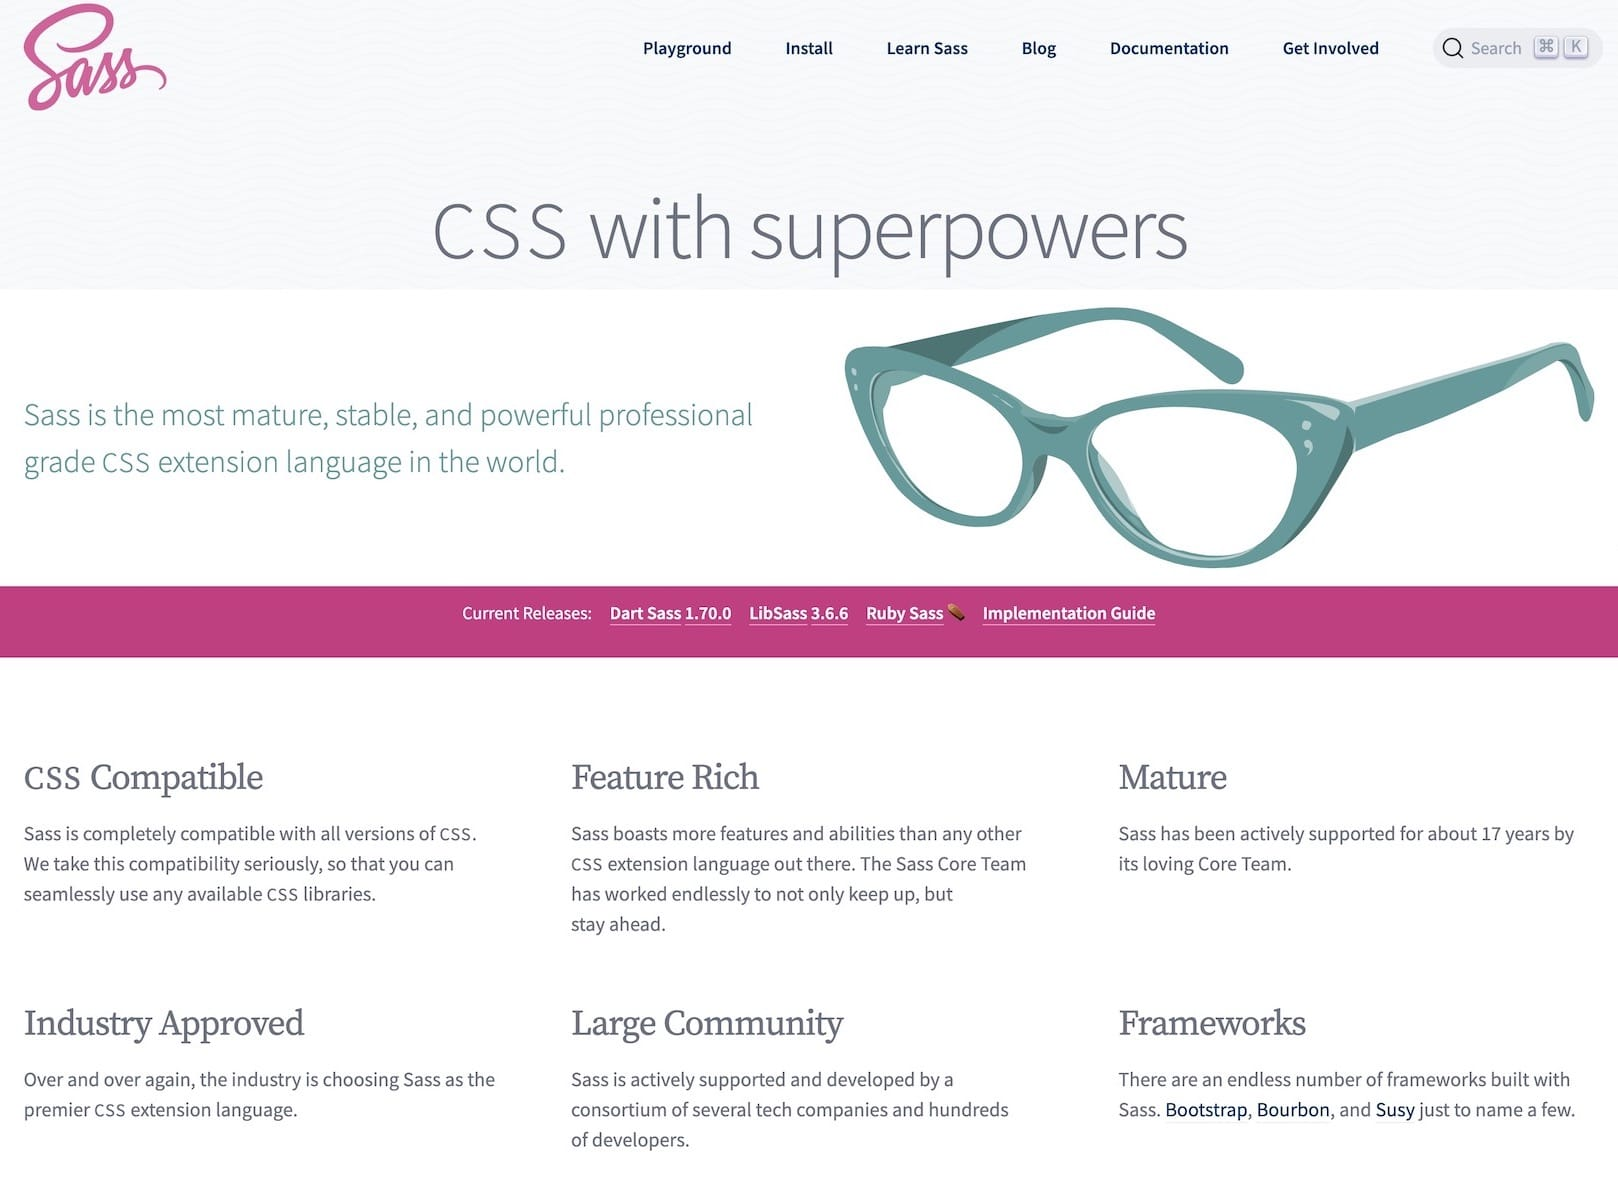 Screenshot of the Sass homepage that includes the heading "CSS with superpowers".